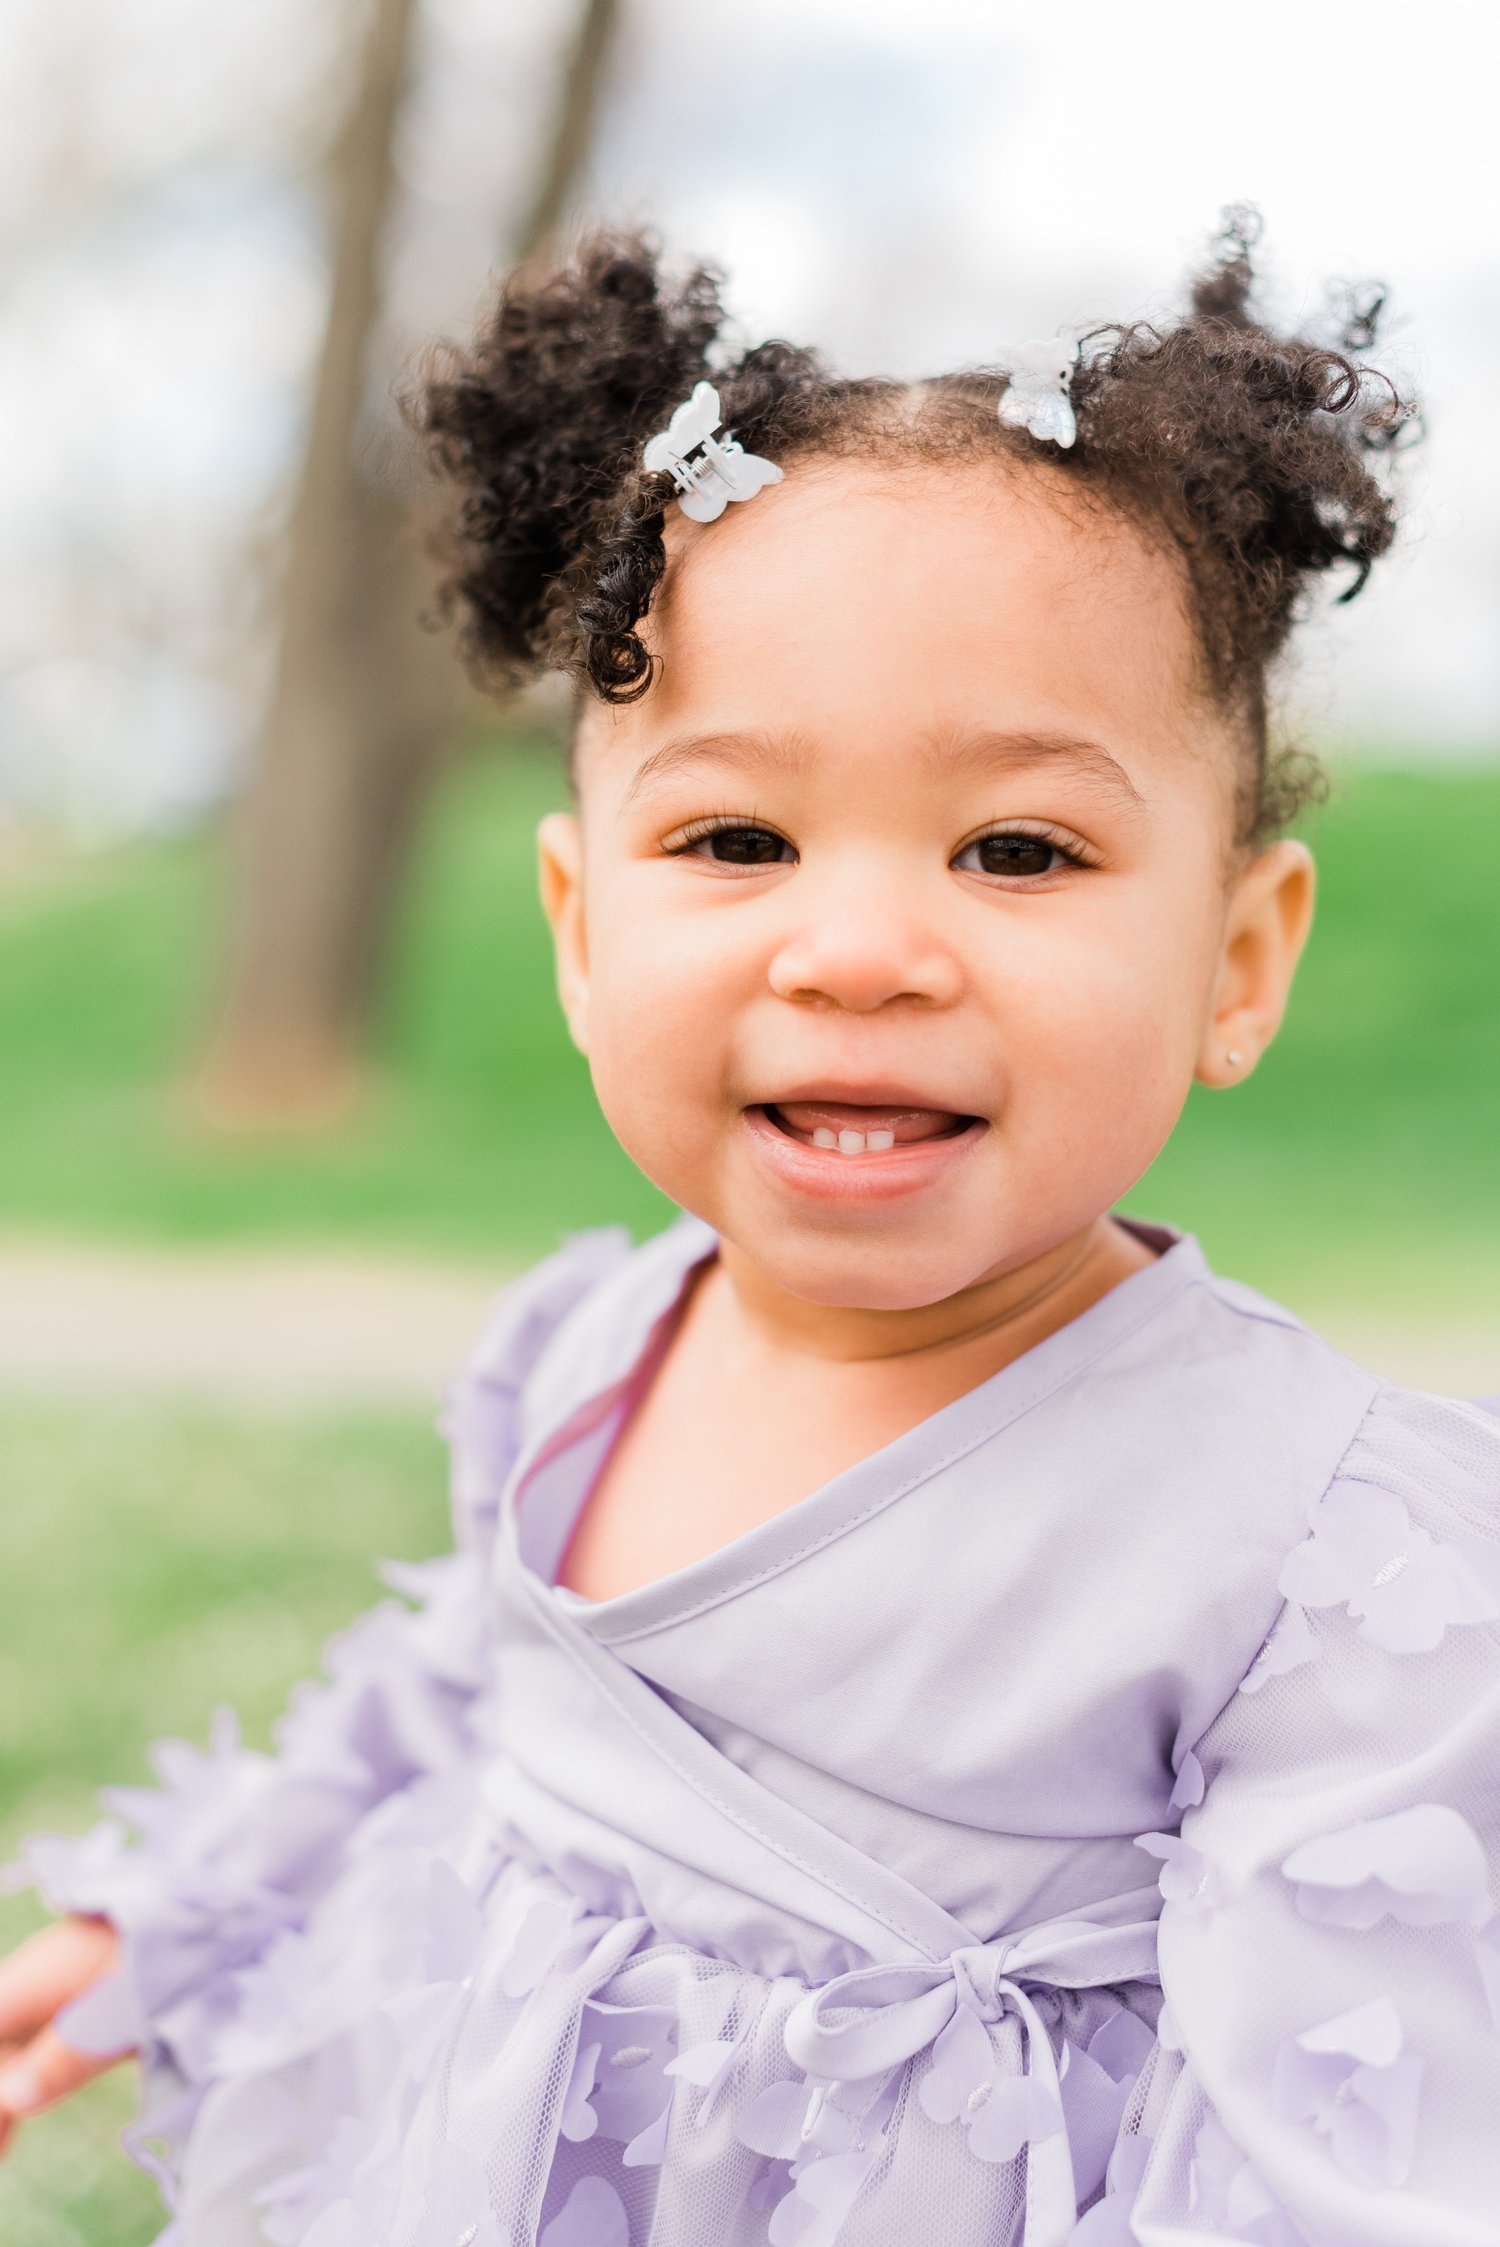  A little girl with curly pigtails shows her little teeth and a cheesy grin captured by Fayetteville photographer, Jacquie Erickson. Children's portraits capture their childhood #childportraits #childrenphotographer #notyourschoolpicture #georgiaphot